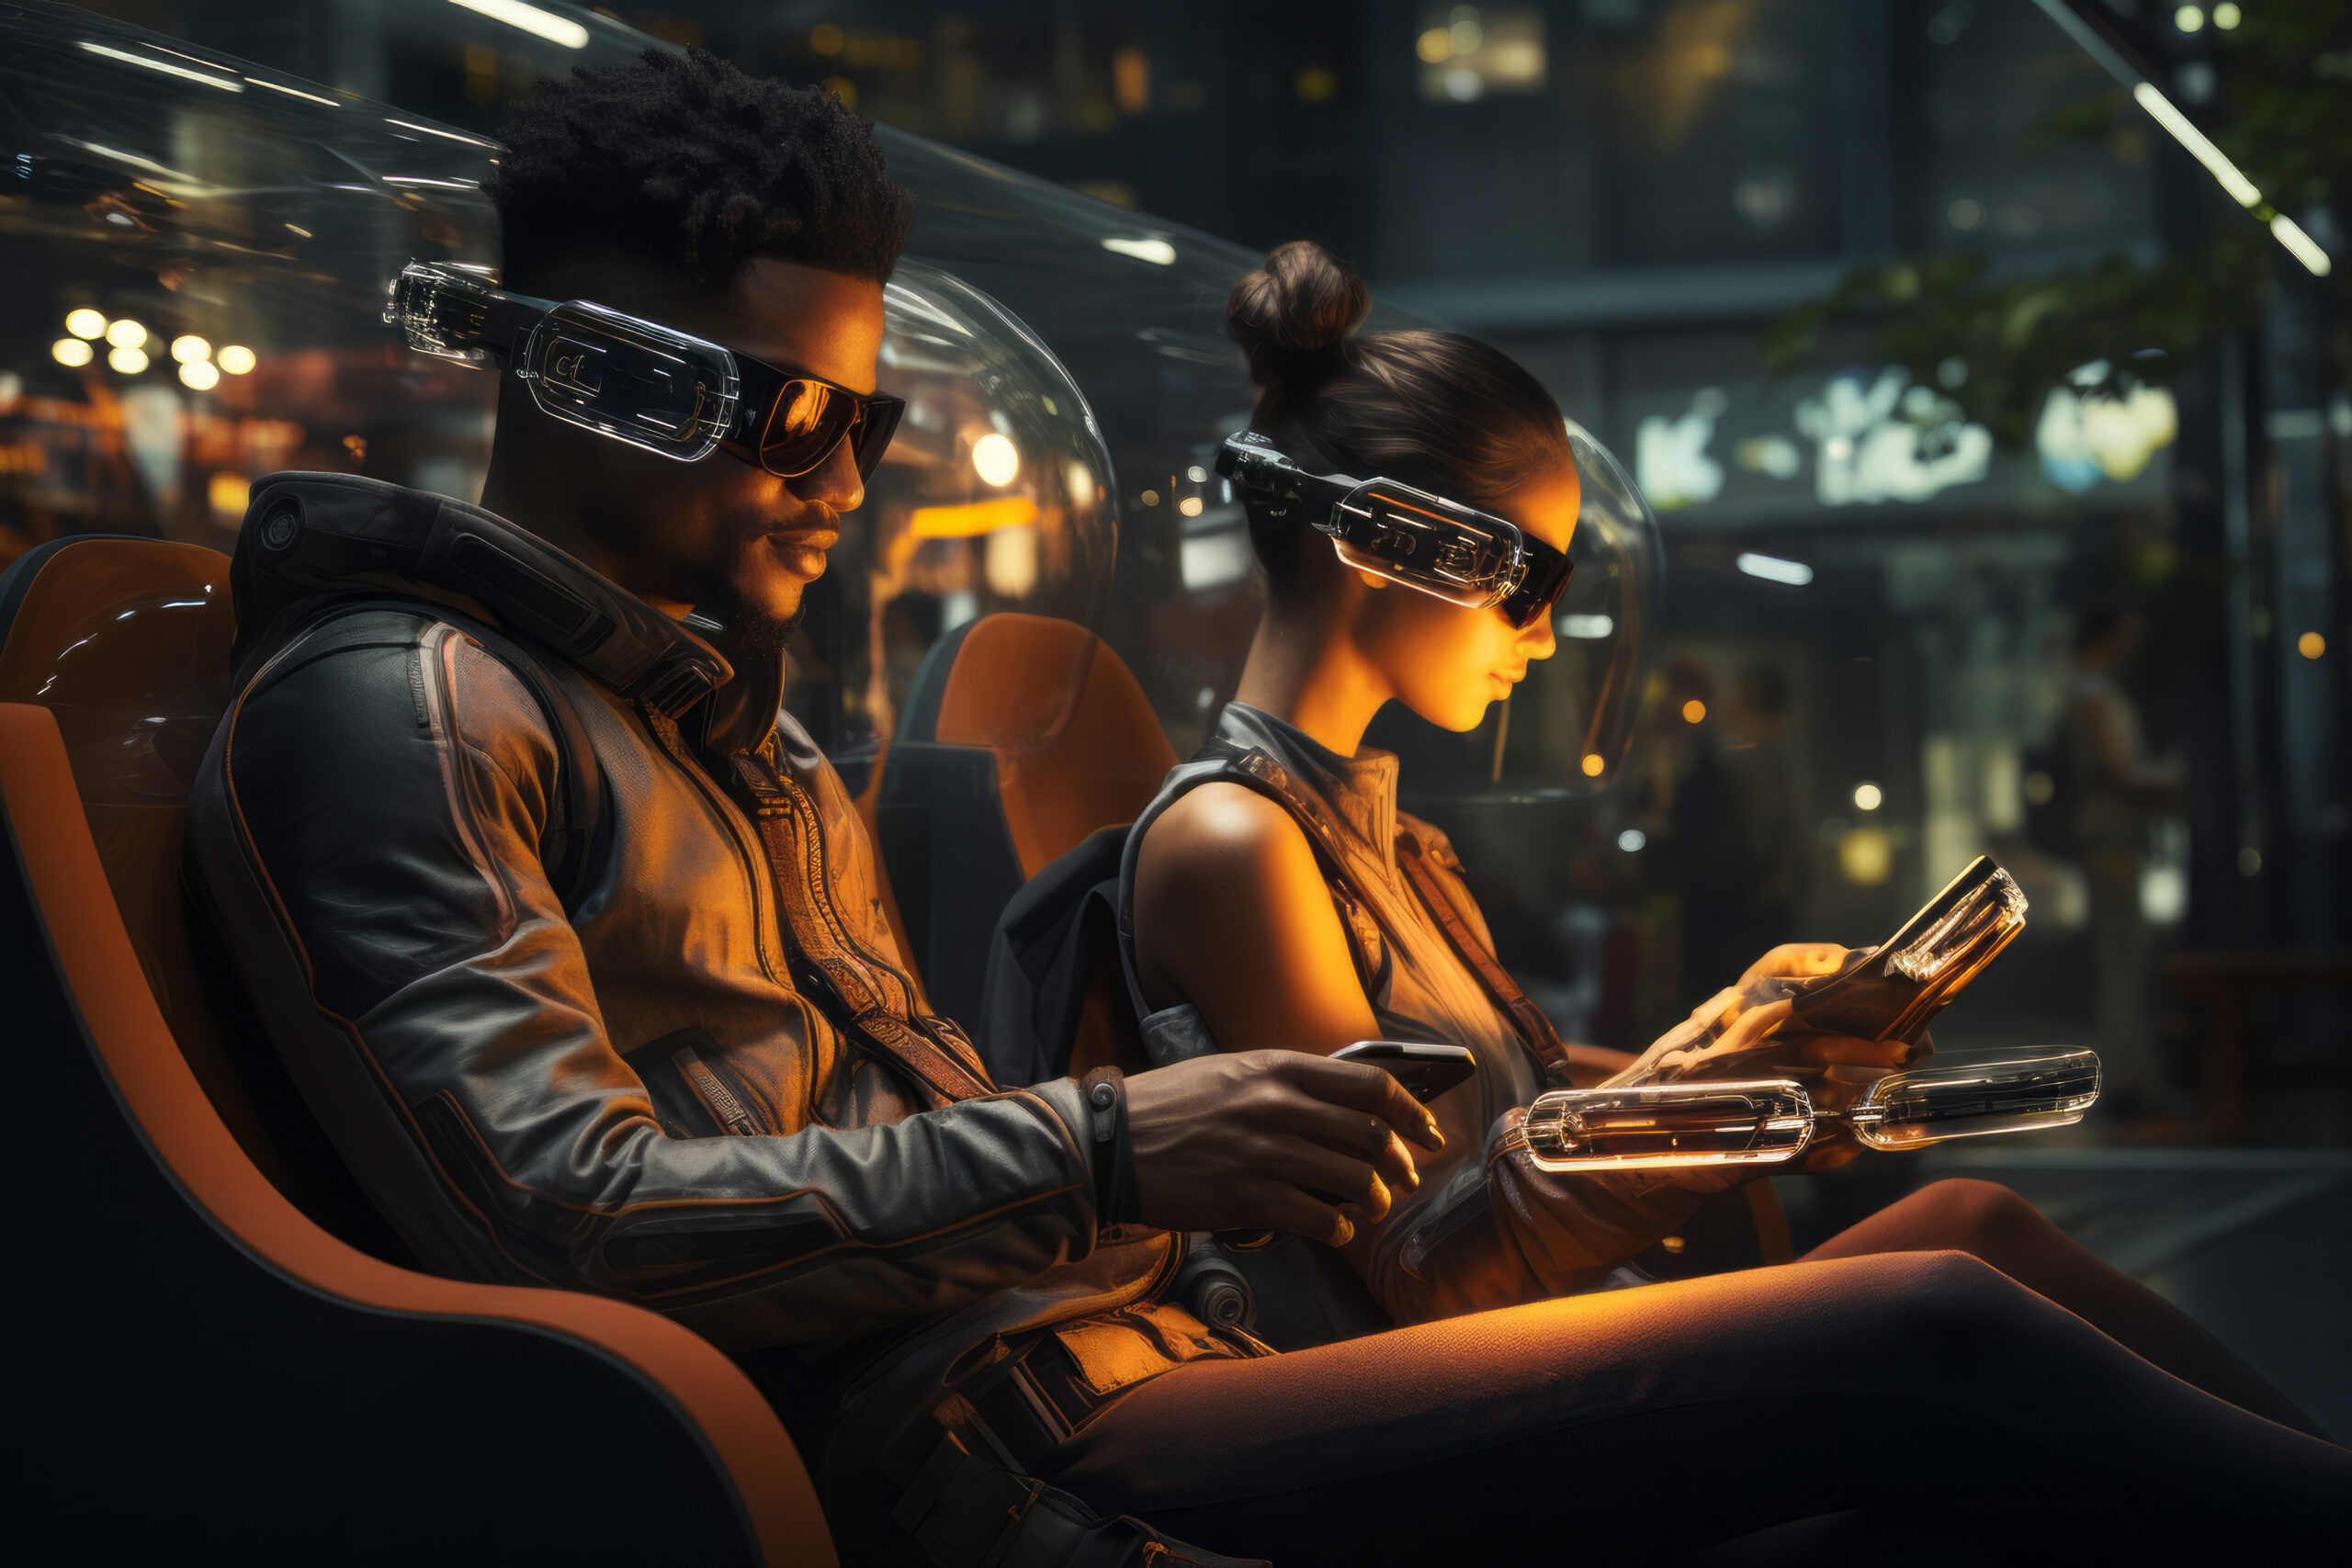 Two individuals wearing futuristic gear and using advanced technology in a high-tech urban environment.